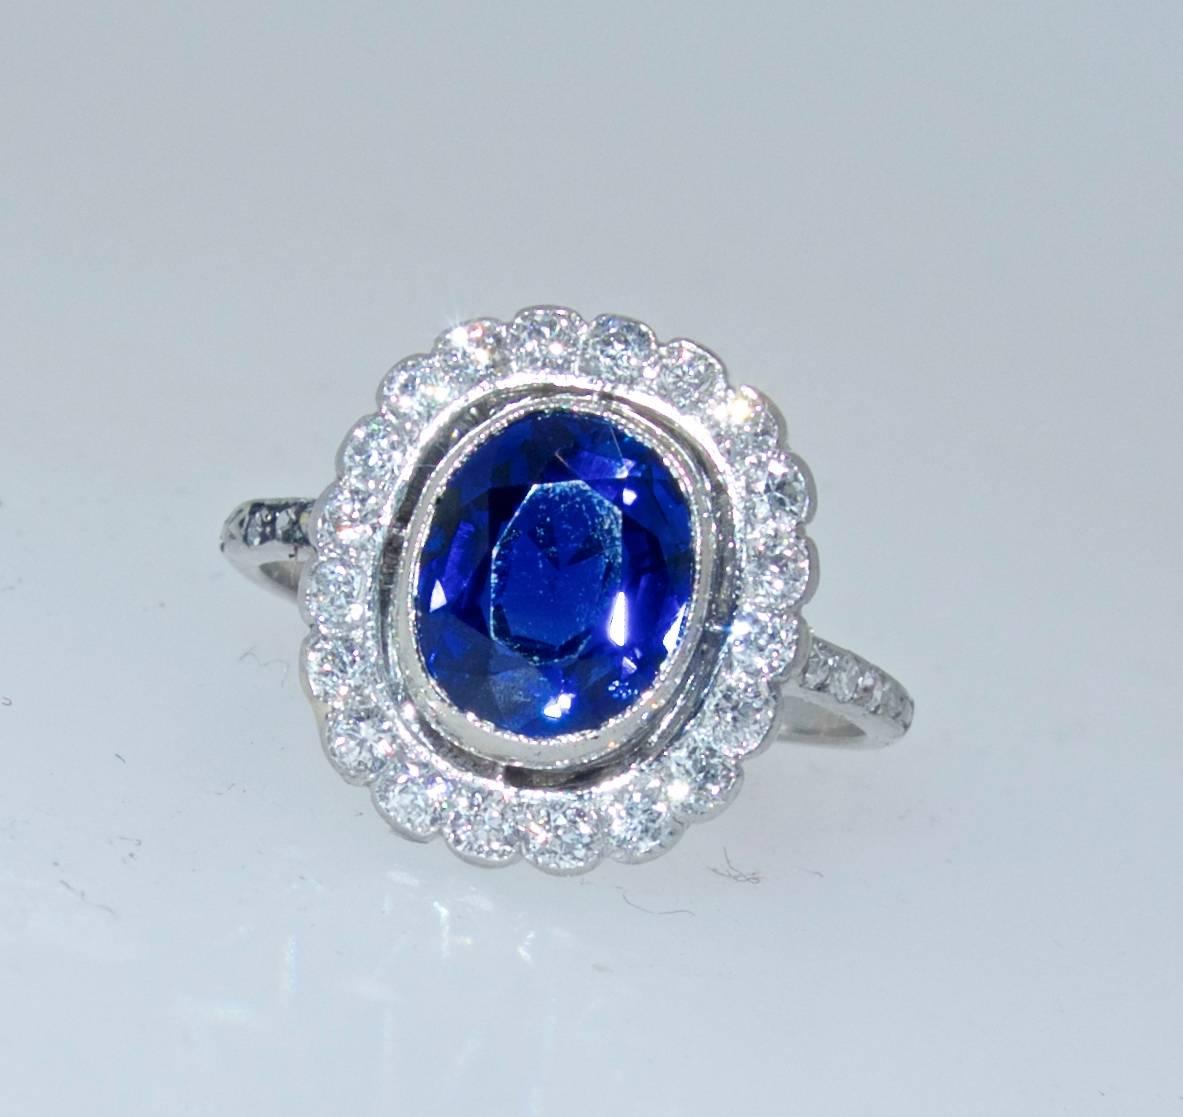  Natural unheated sapphire weighing 2.32 cts and displaying a bright blue.  This platinum ring also has .60 cts of old European cut diamonds which surround this lovely sapphire.  Circa 1915.